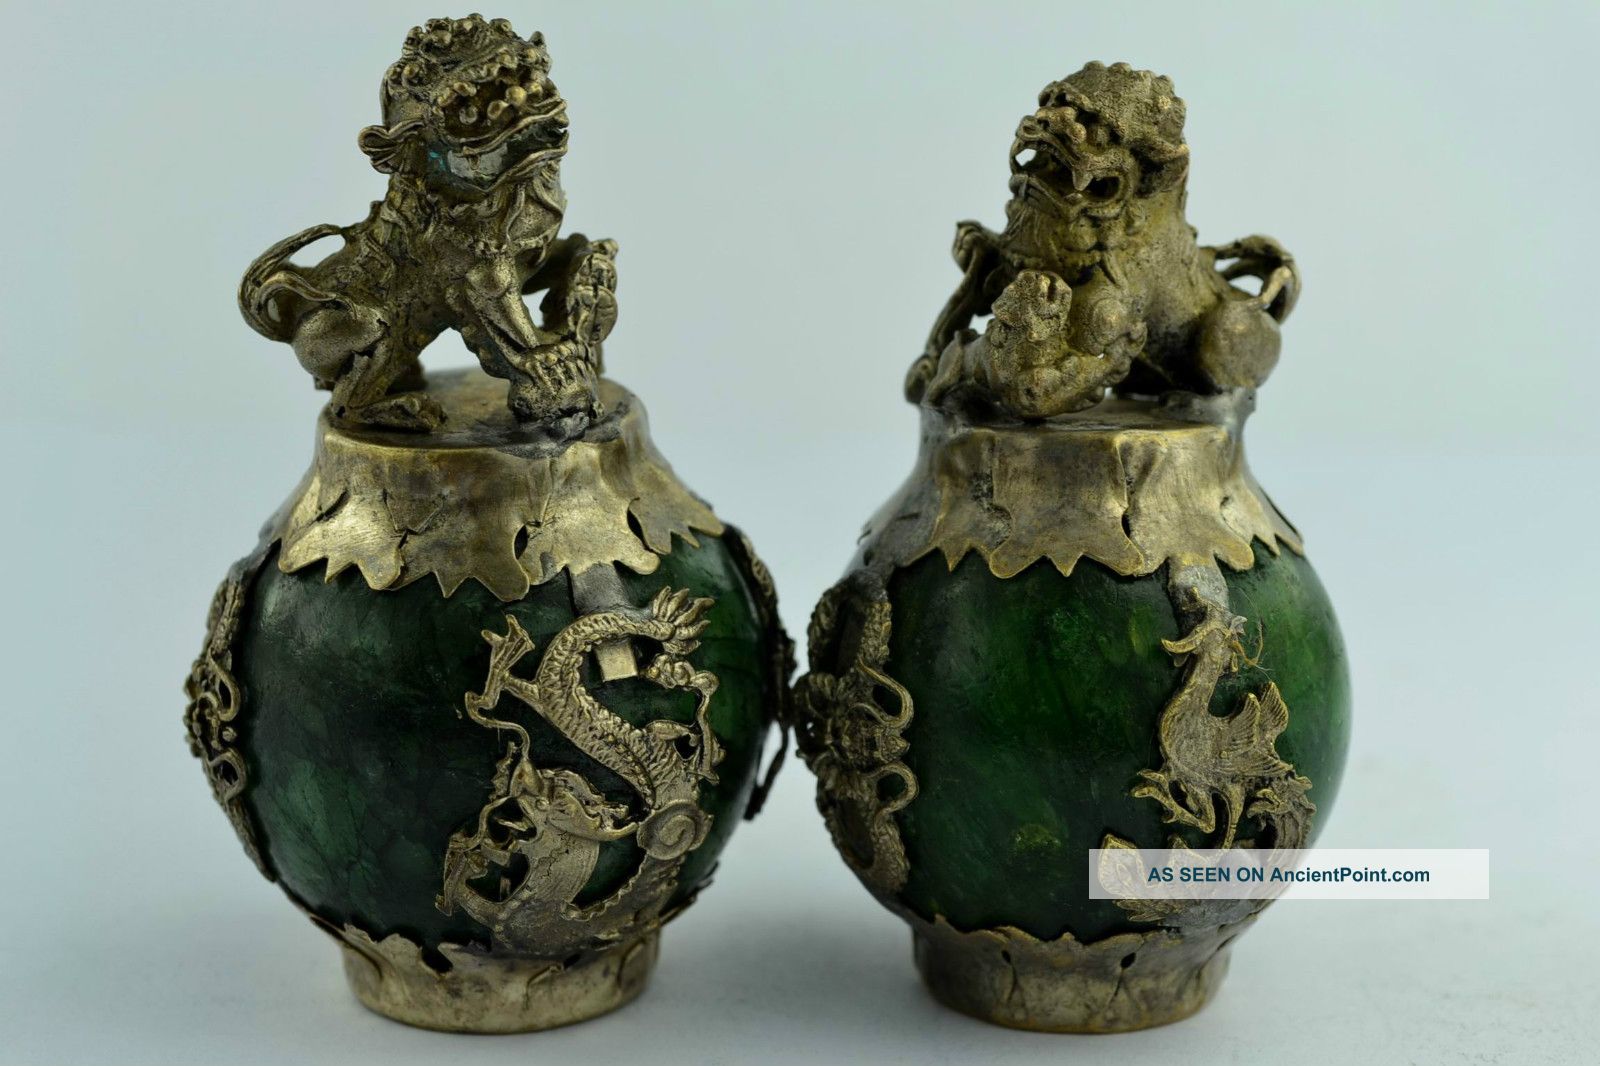 China Rare Collectibles Old Handwork Jade Kylin Pair Statue +++ Uncategorized photo